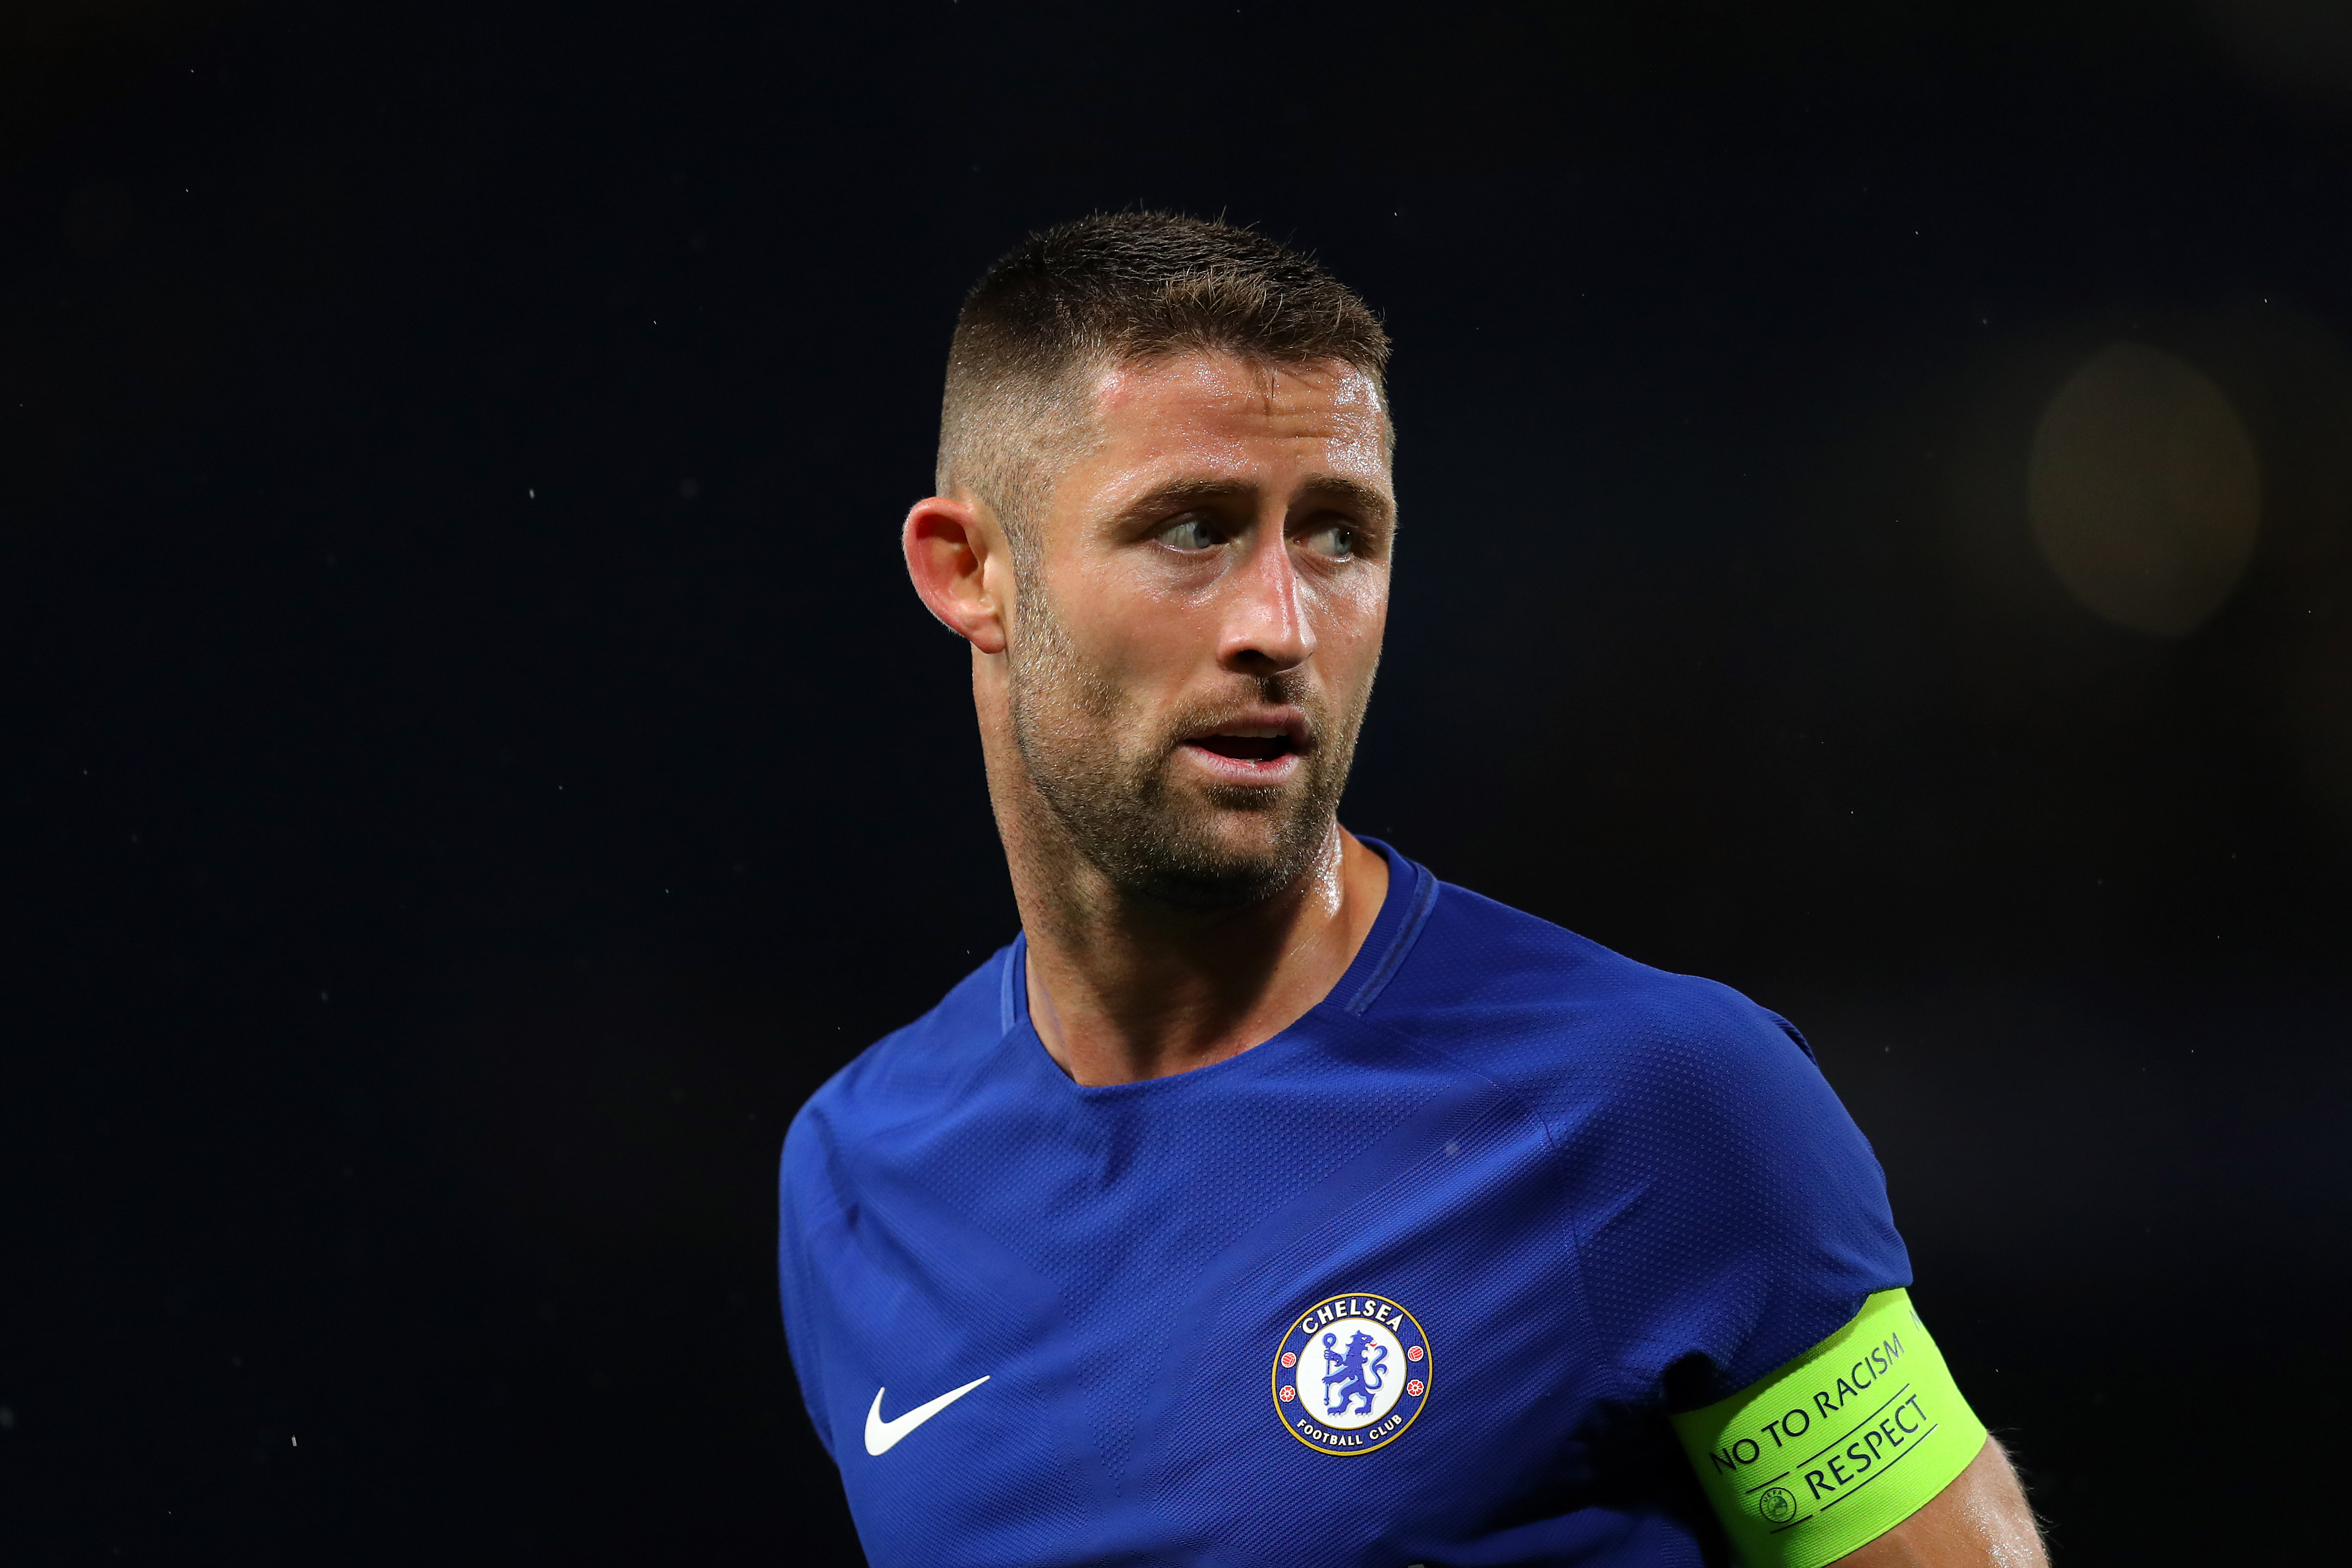 LONDON, ENGLAND - SEPTEMBER 12: Gary Cahill of Chelsea in action during the UEFA Champions League group C match between Chelsea FC and Qarabag FK at Stamford Bridge on September 12, 2017 in London, United Kingdom. (Photo by Richard Heathcote/Getty Images)